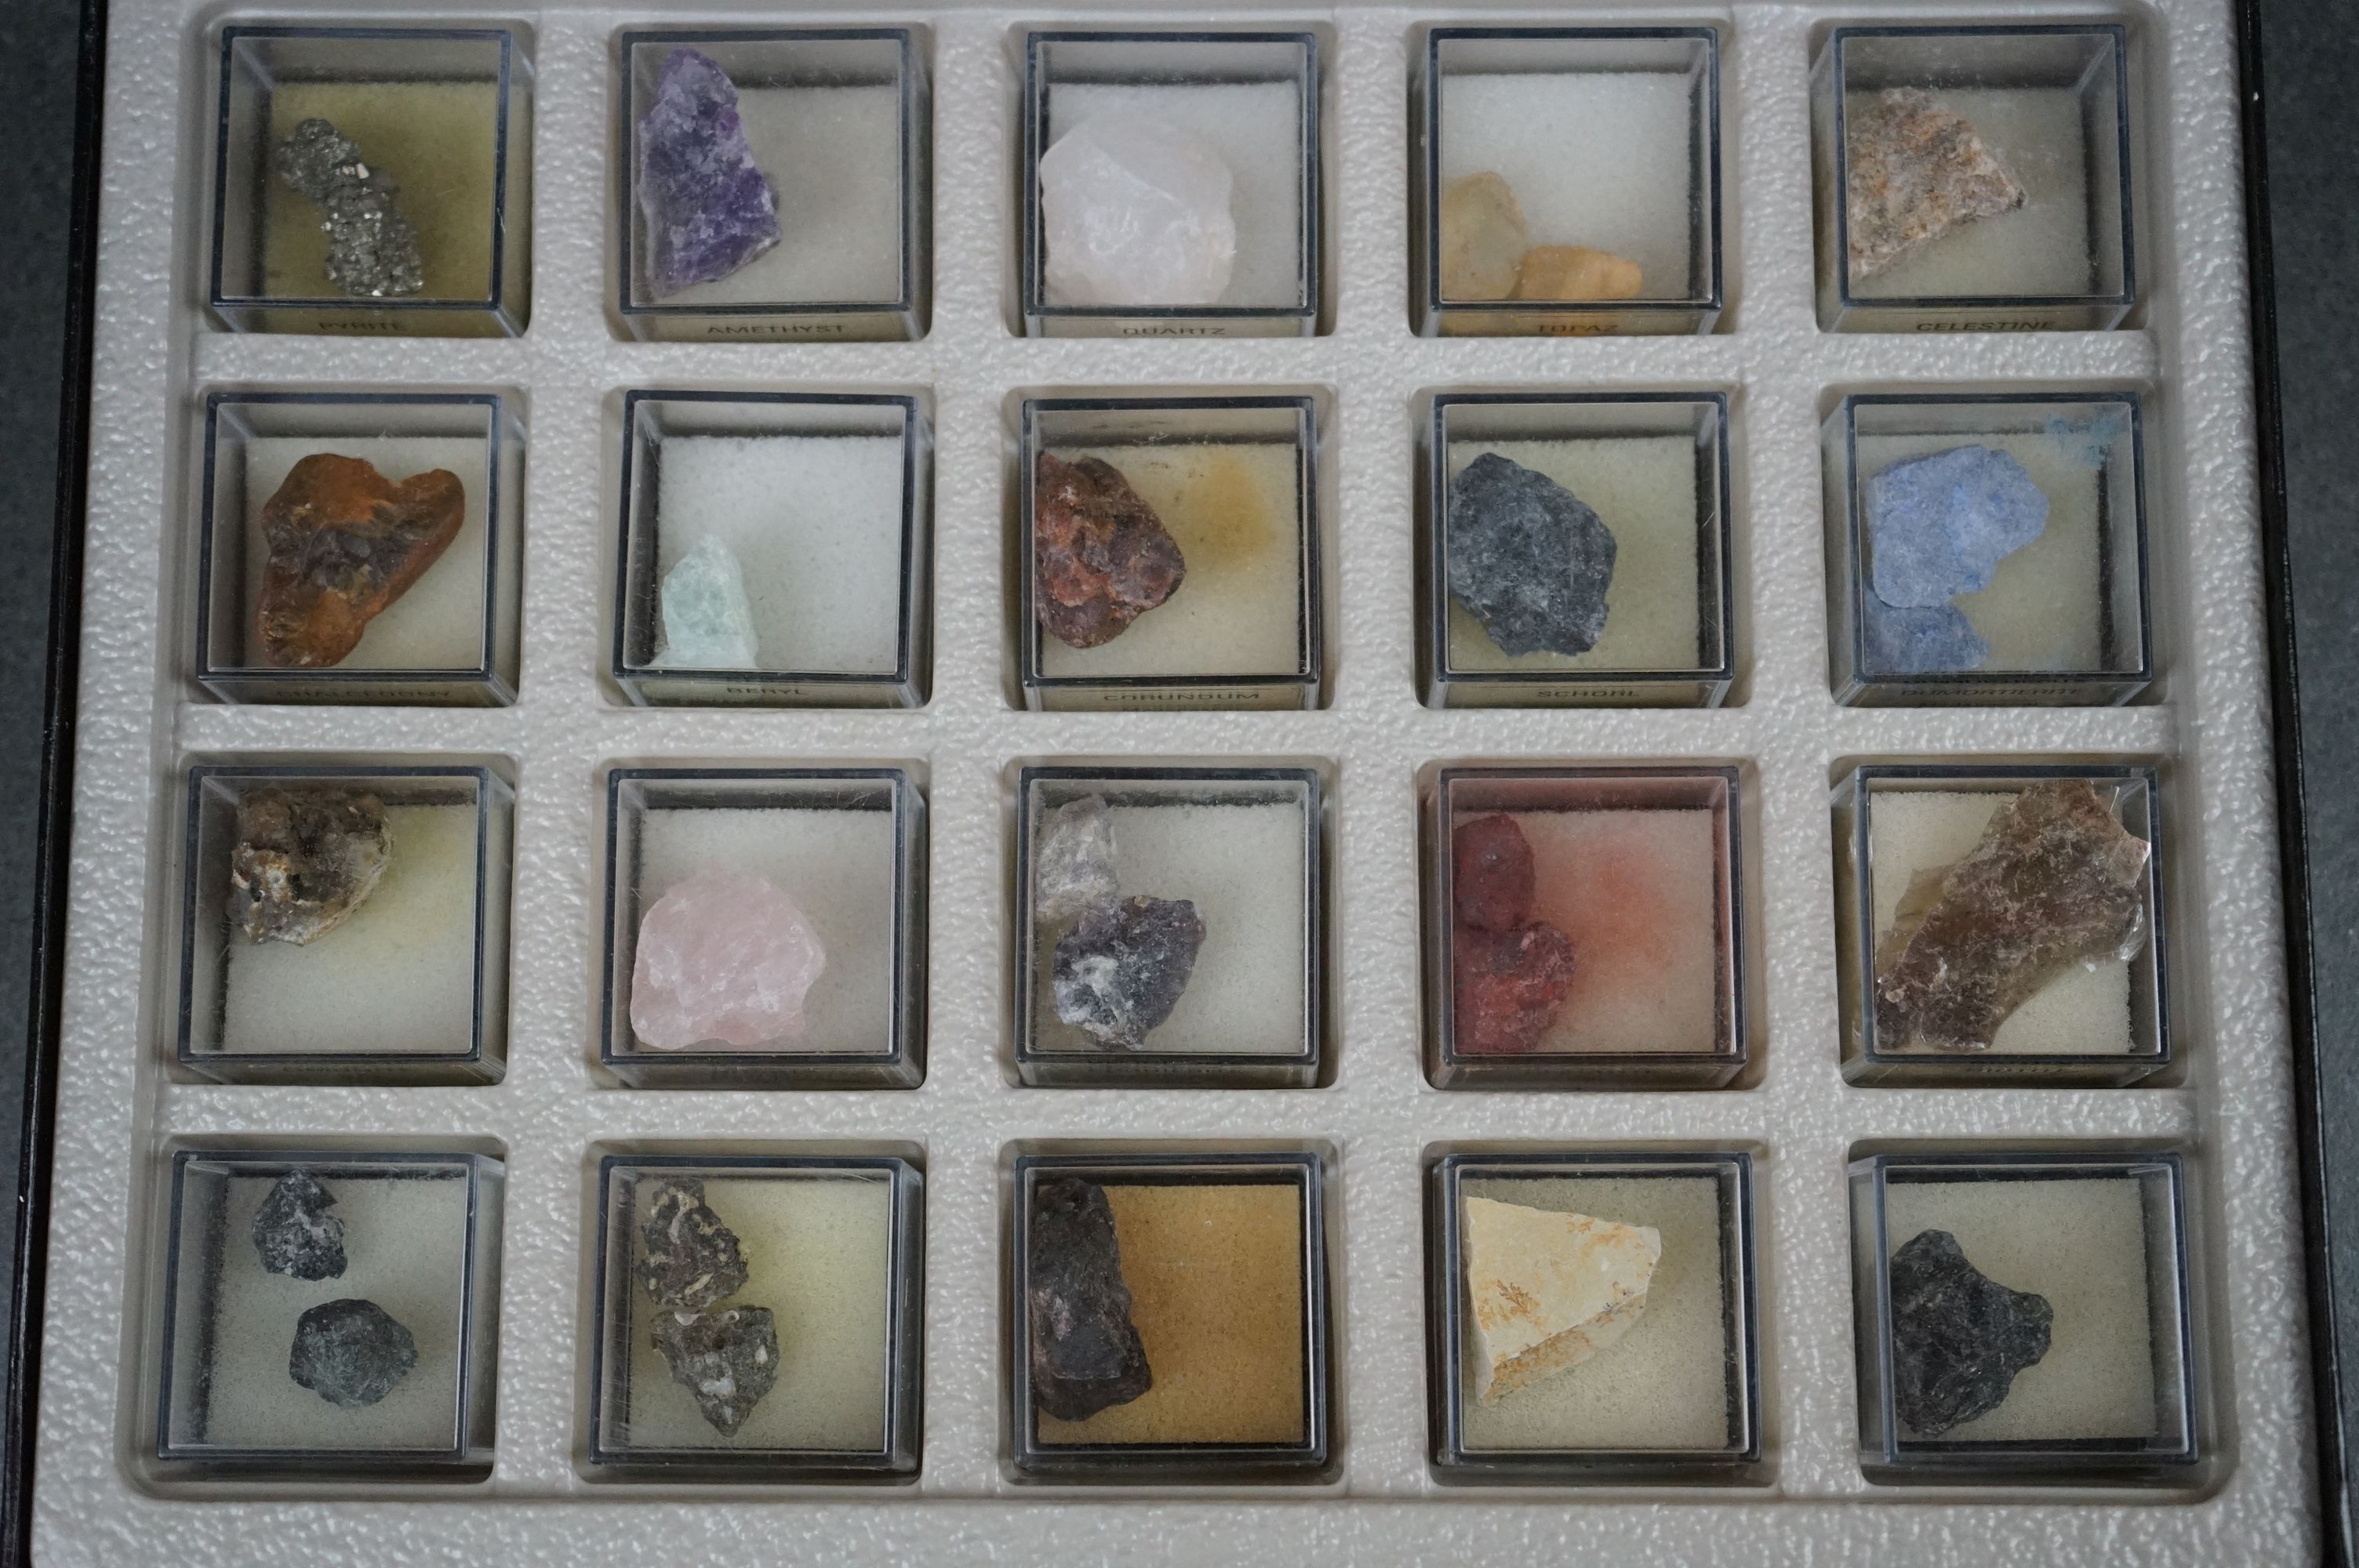 Collection of minerals and gemstones in display cases - Image 10 of 12